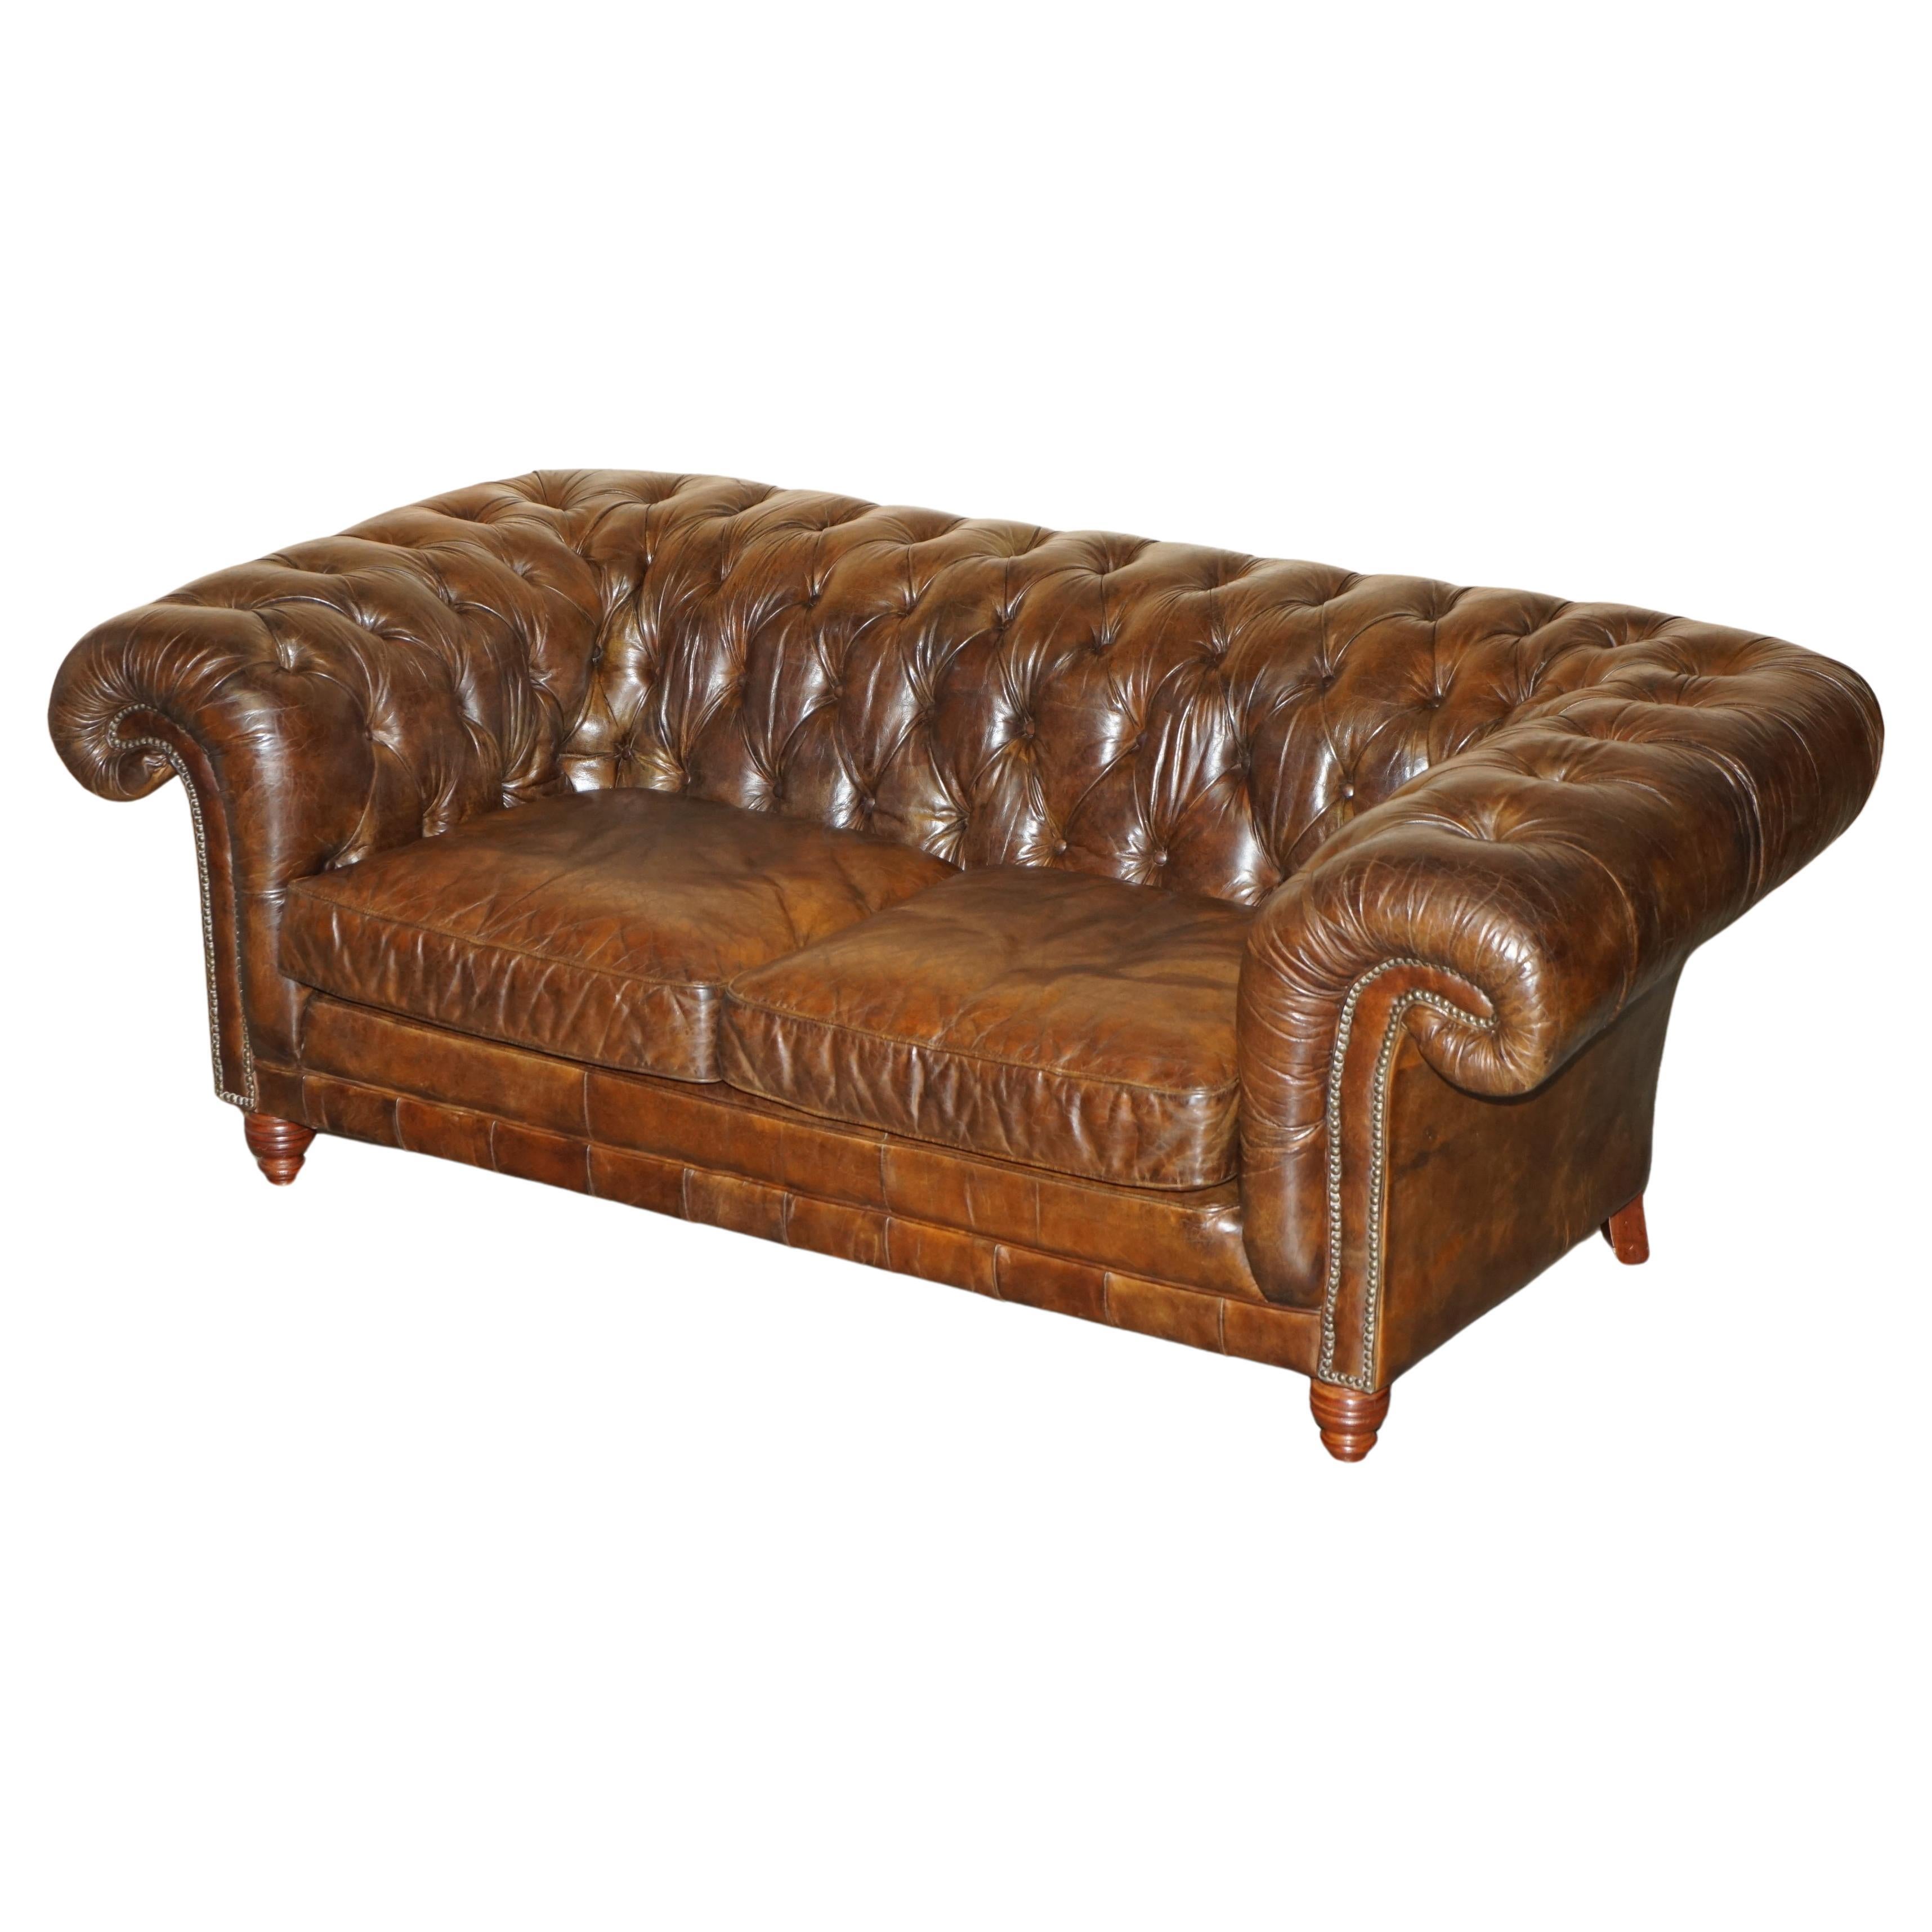 1 OF 2 TIMOTHY OULTON HERITAGE BROWN OVERSIZED LEATHER CHESTERFIELD HALO SOFAs